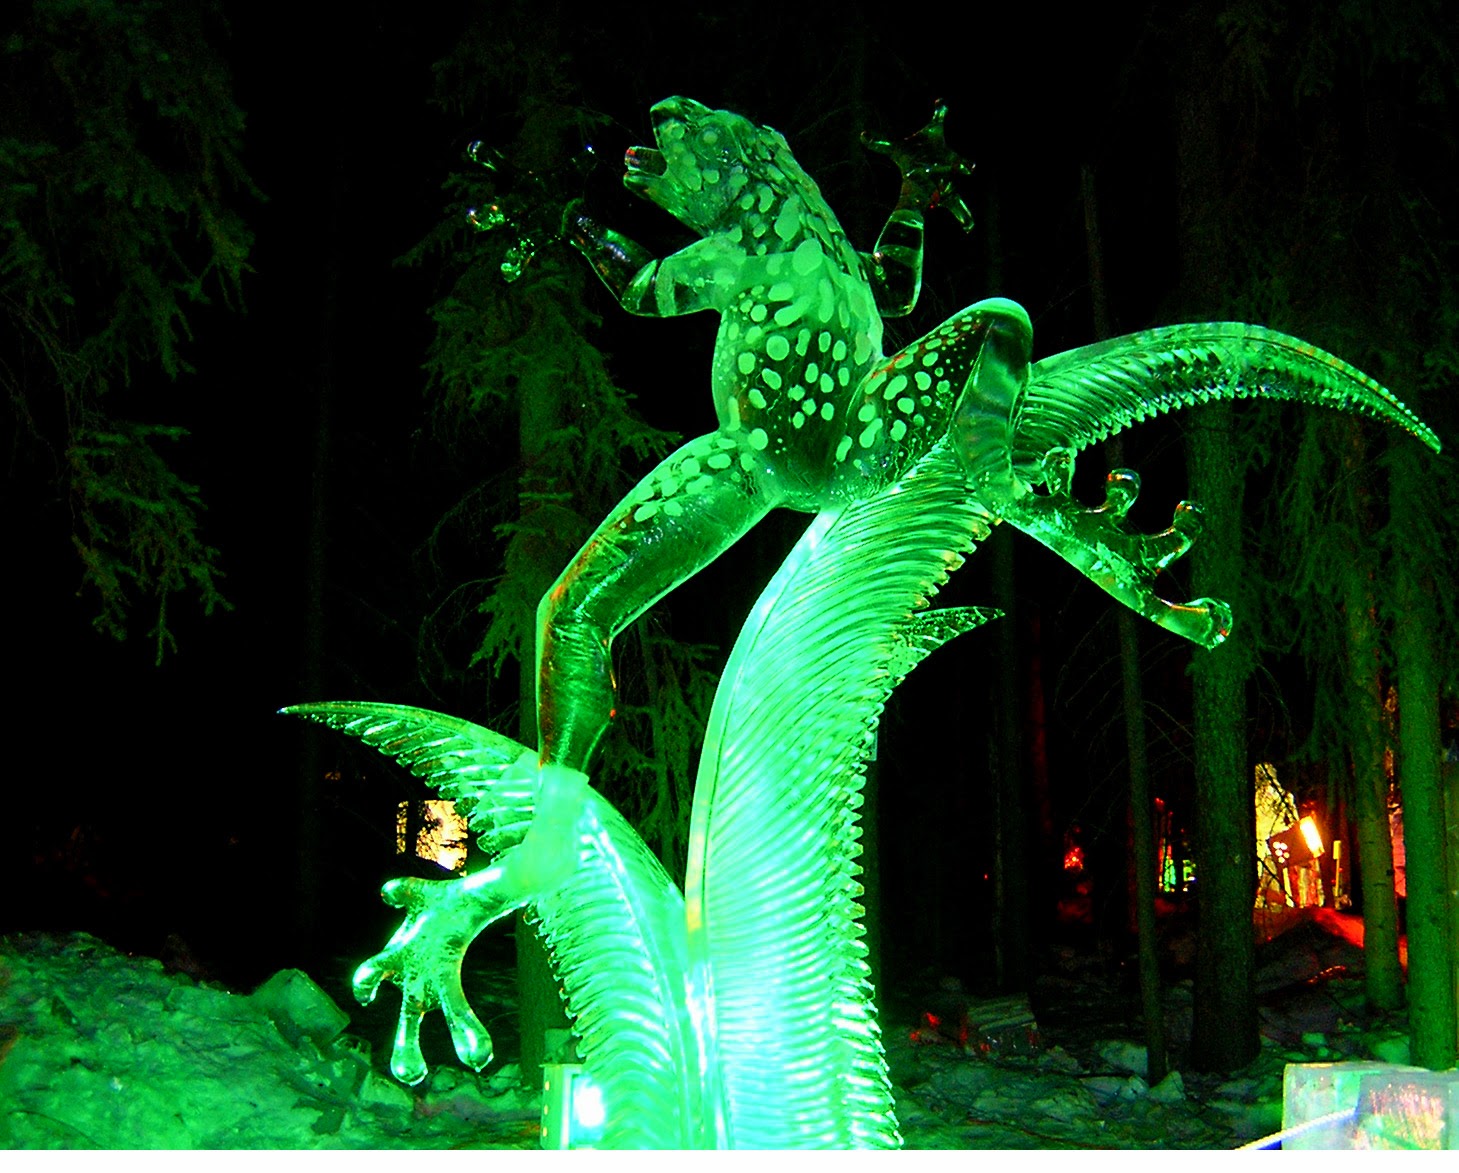 A giant frog carved from ice. It is dark and the frog is lighted in green lights.